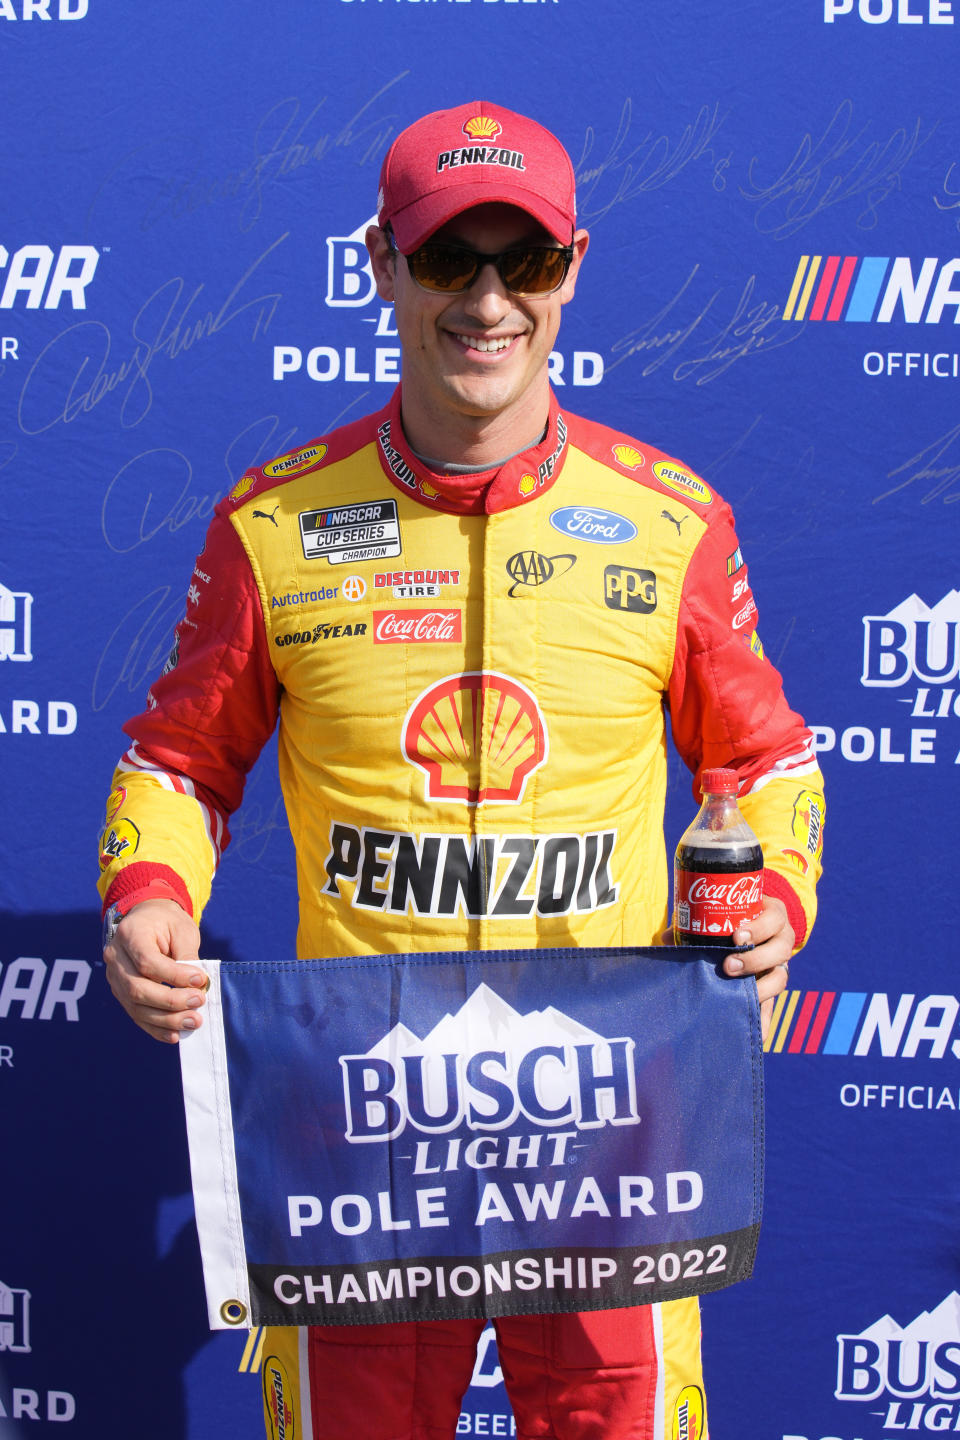 Joey Logano poses for the media after winning the pole for a NASCAR Cup Series auto race Saturday, Nov. 5, 2022, in Avondale, Ariz. The race is for the championship on Sunday. (AP Photo/Rick Scuteri)